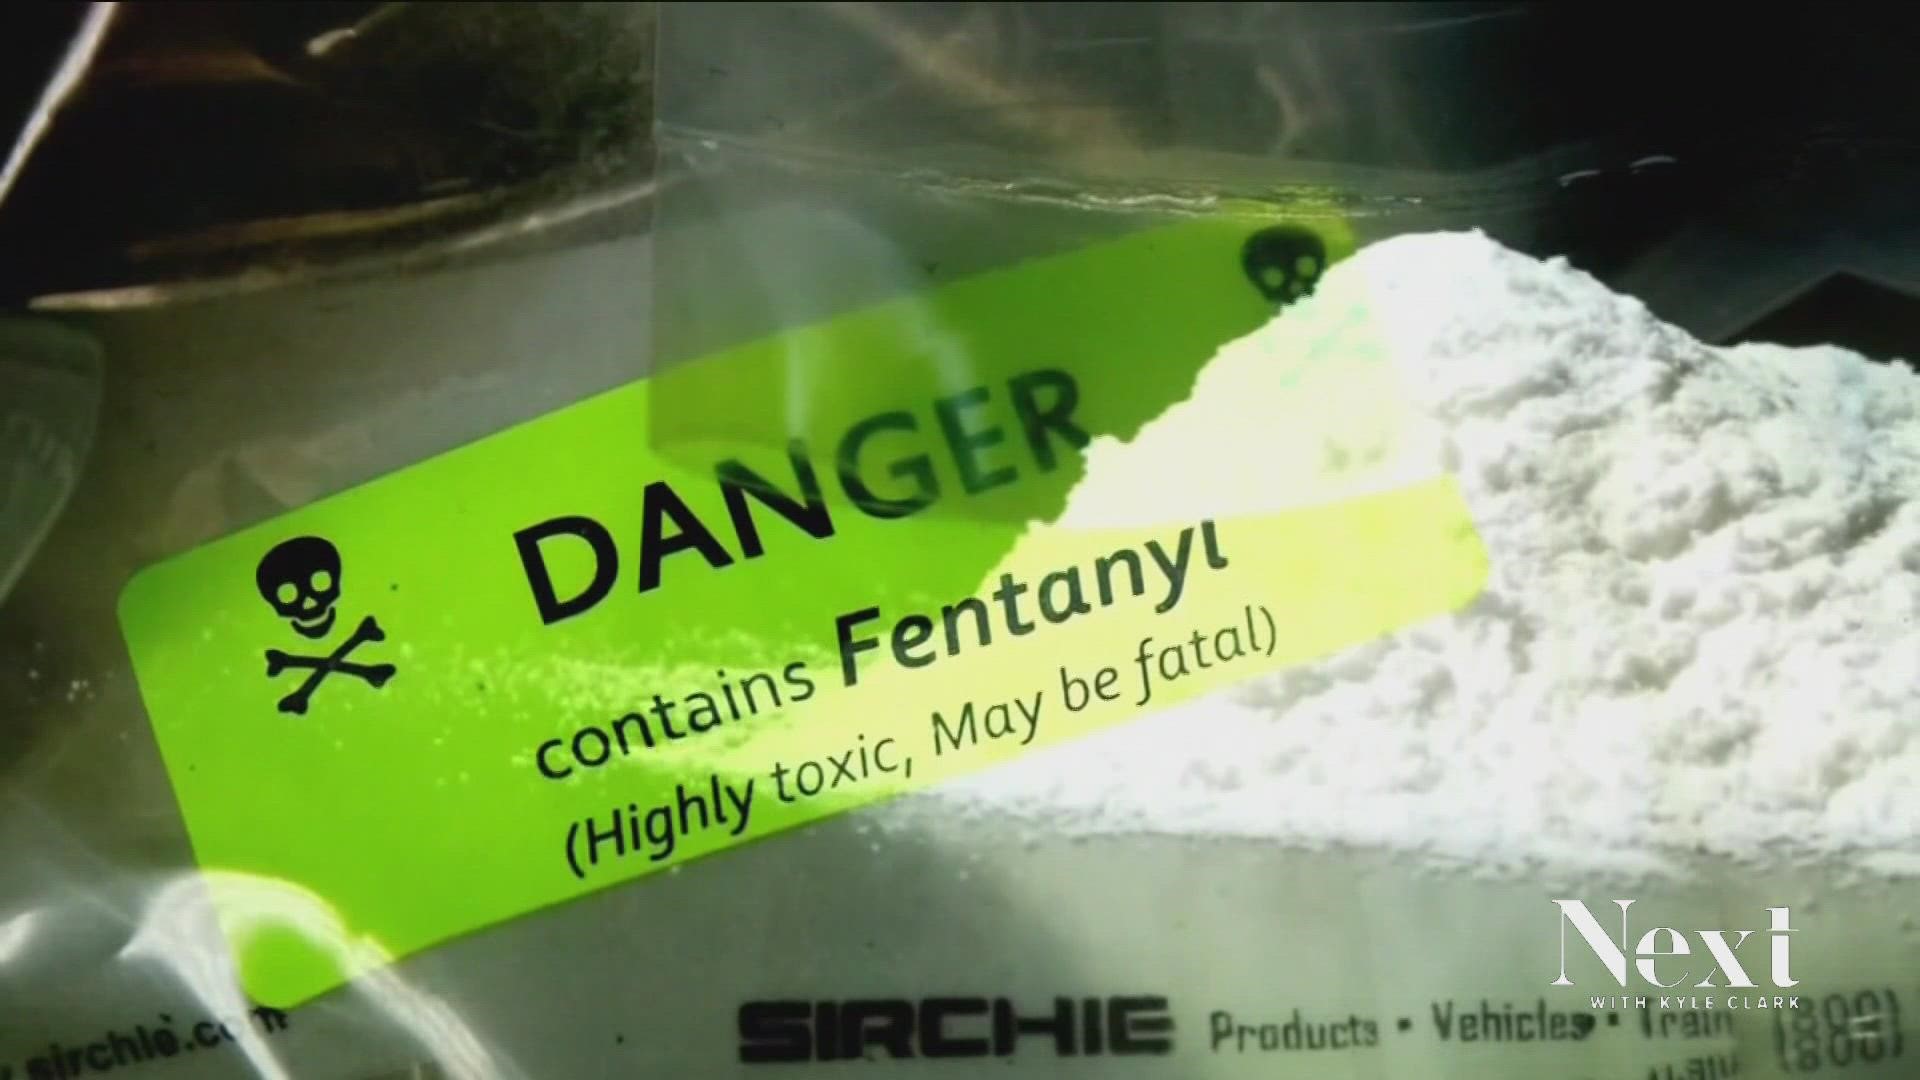 Possessing 1 to 4 grams of fentanyl is now a felony whether or not someone knows their pills or powder contains the substance, the leading cause of overdose death.